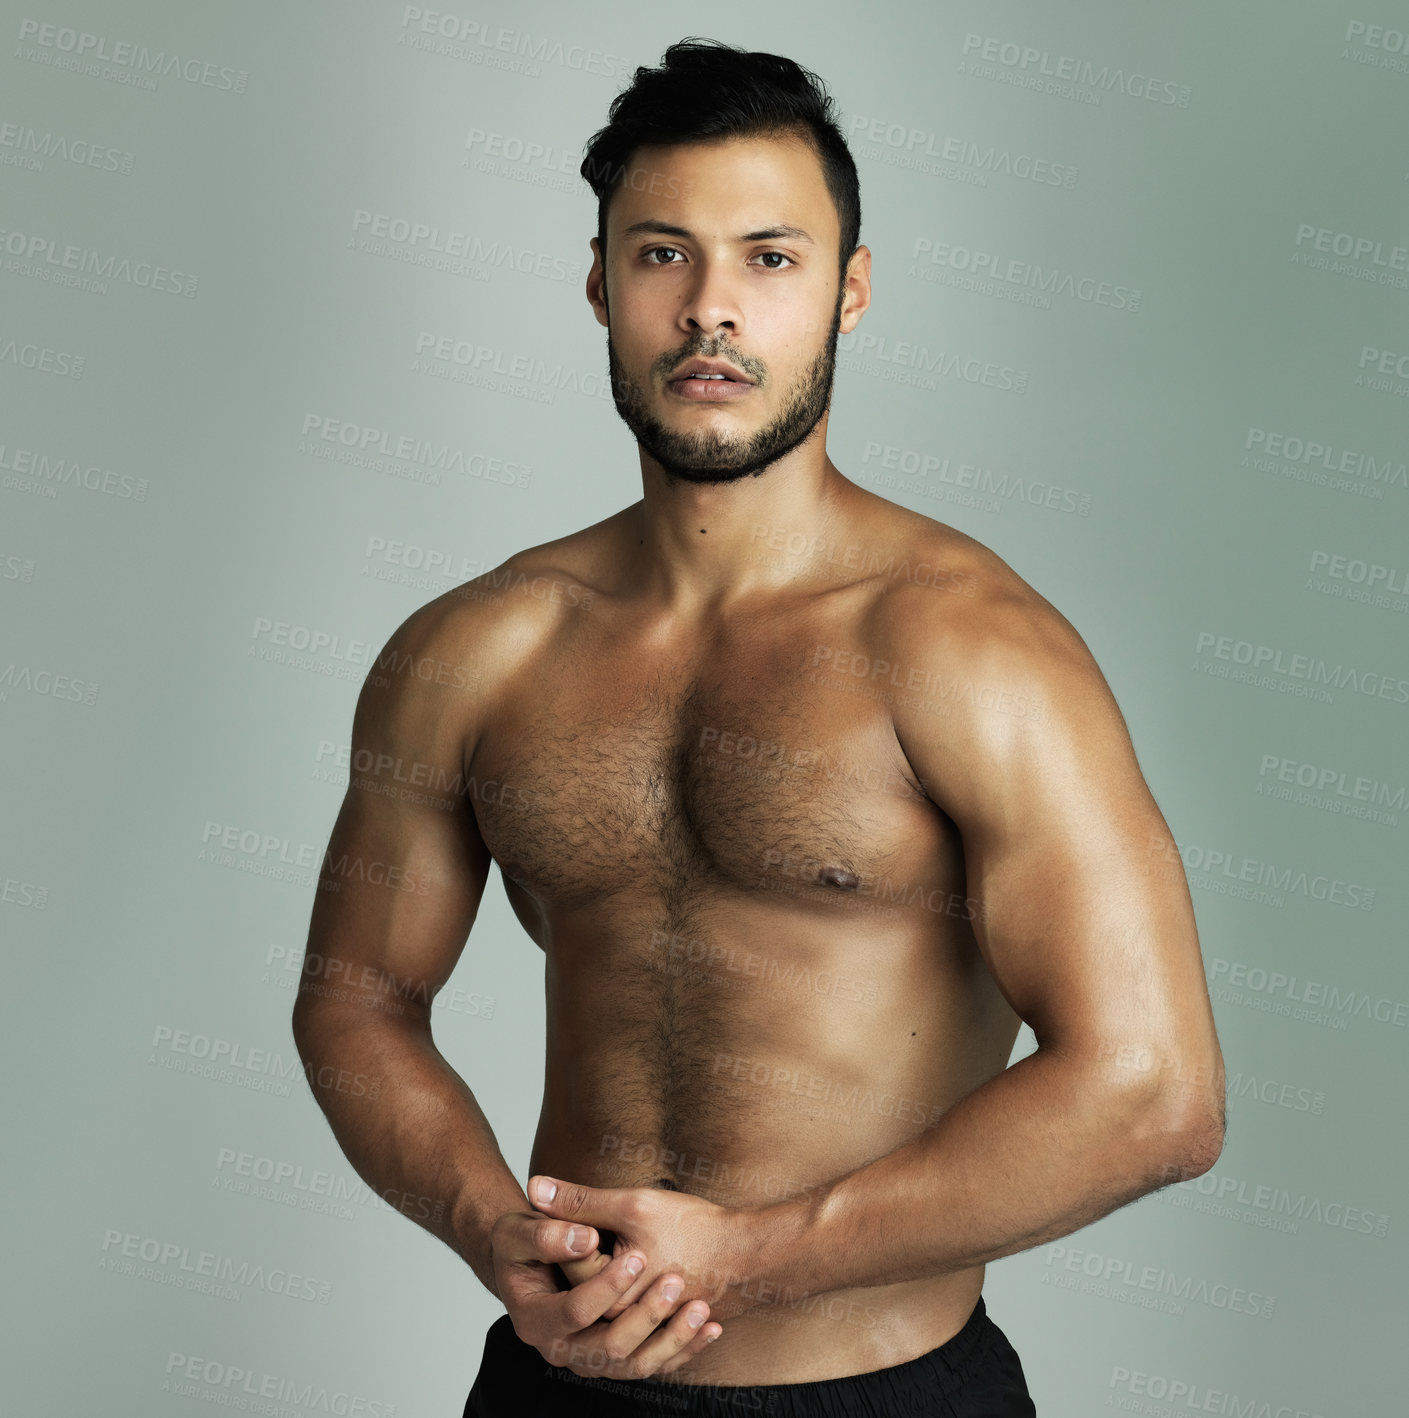 Buy stock photo Studio shot of an athletic young man flexing his muscles against a gray background